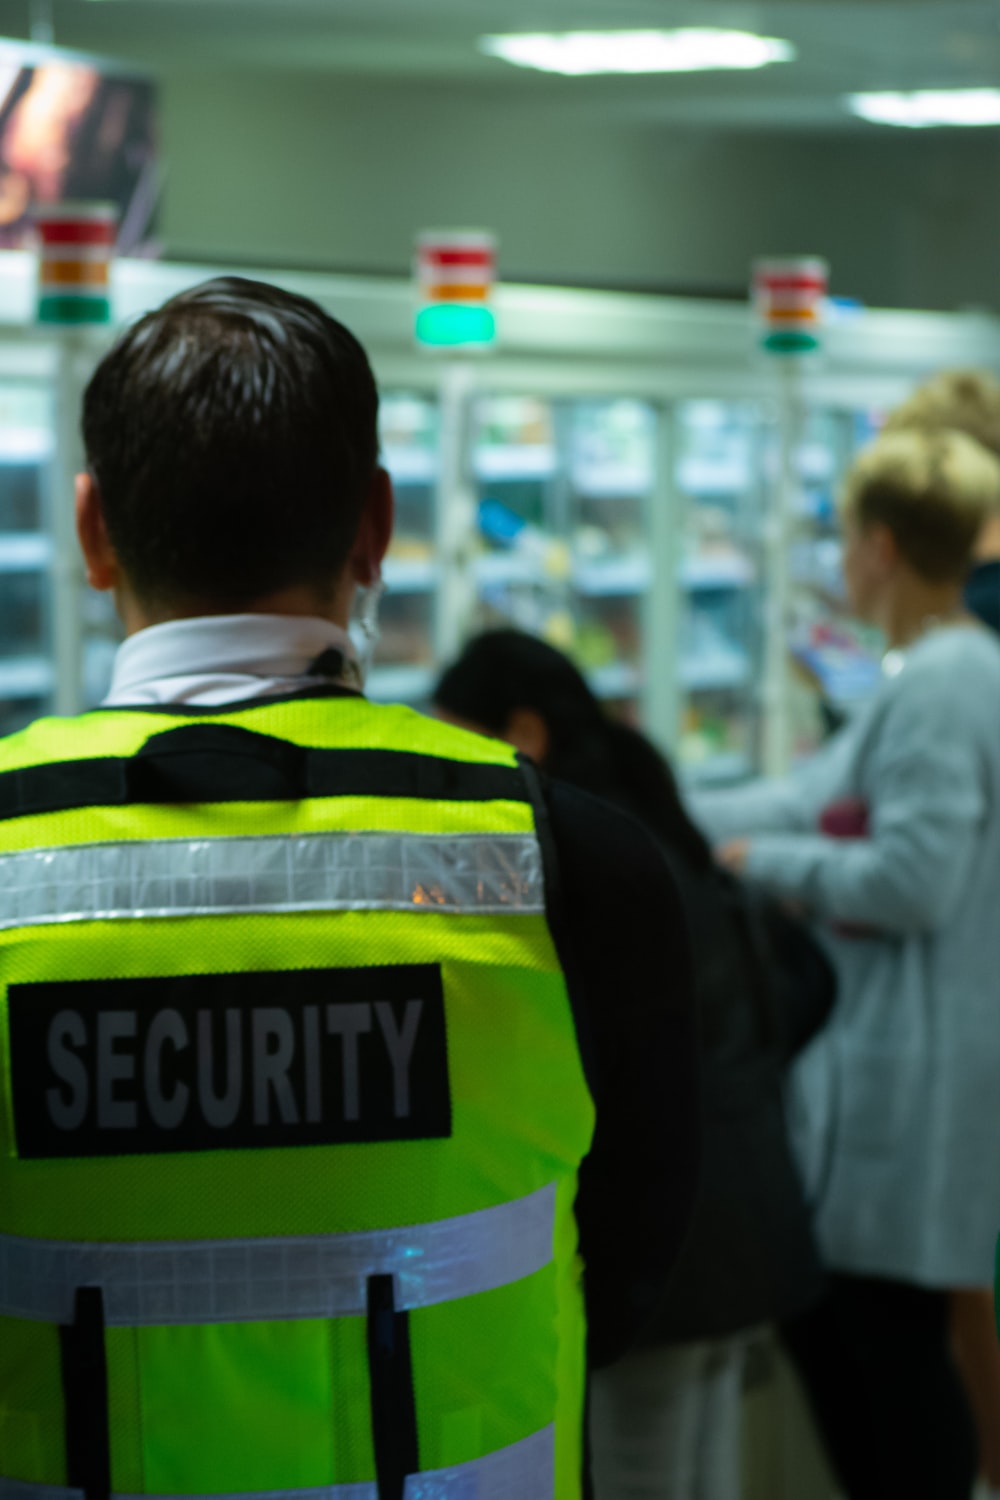 Airport Security Picture. Download Free Image